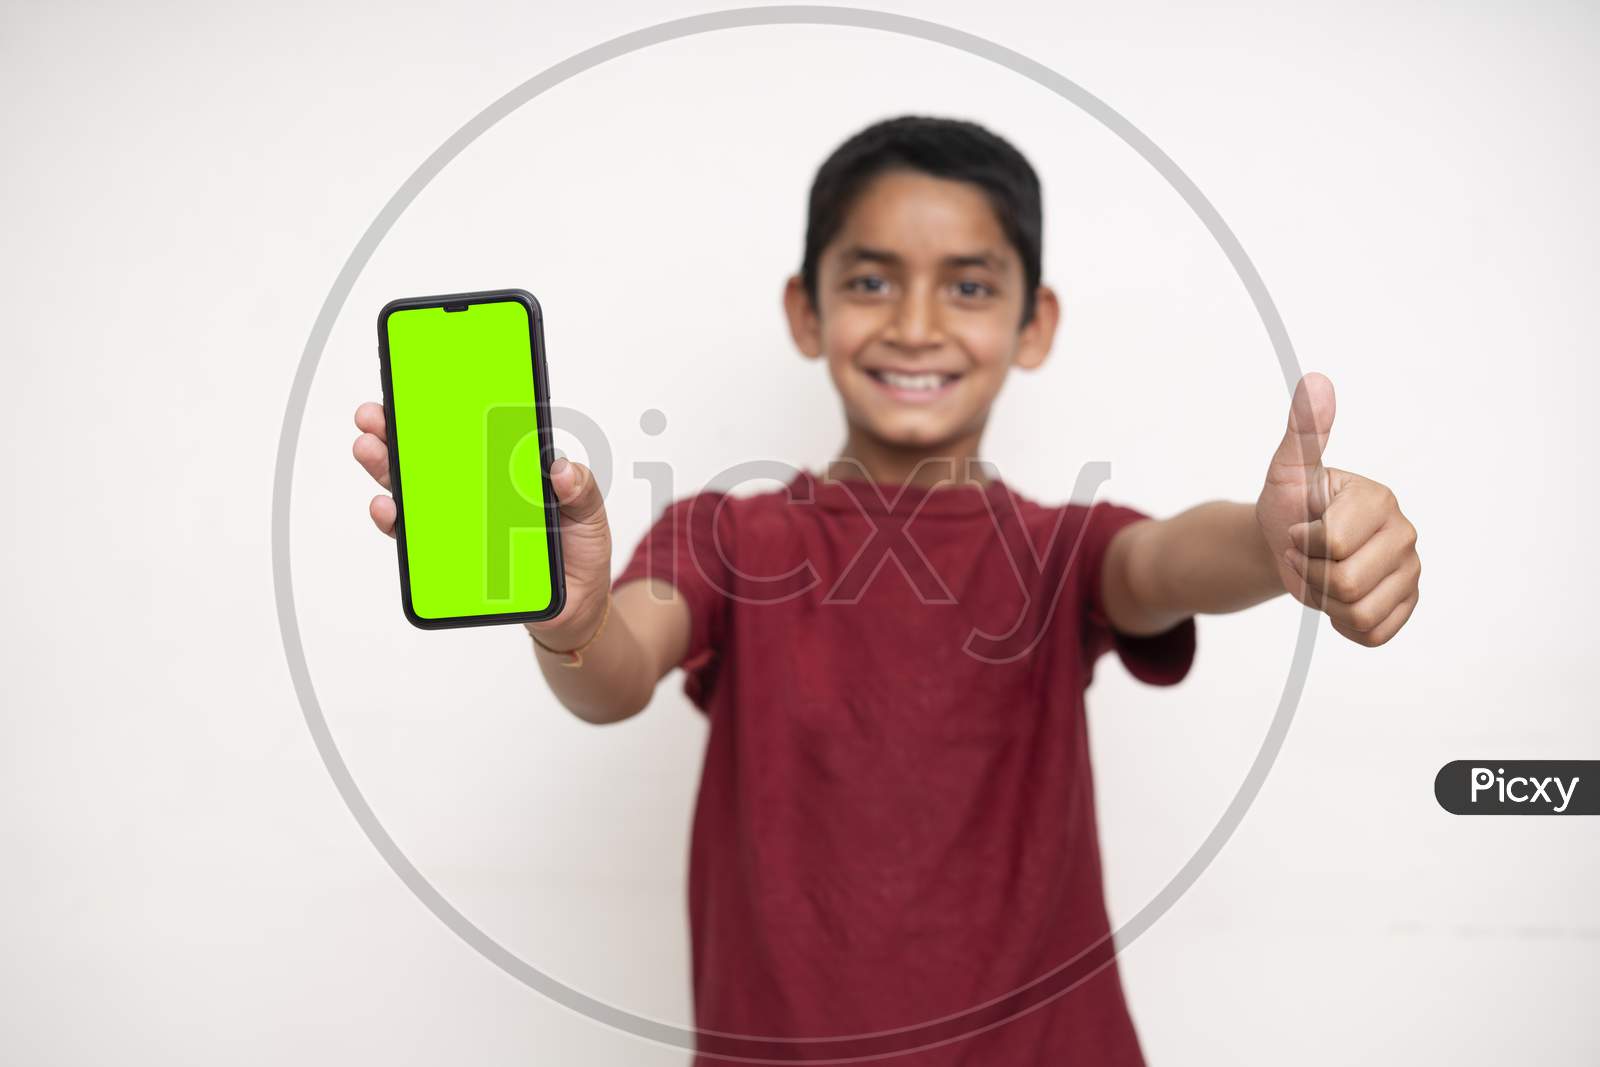 Young Indian Kid Holding A Phone In His Hands With A Green Screen Standing On A White Isolated Background With Copy Space.